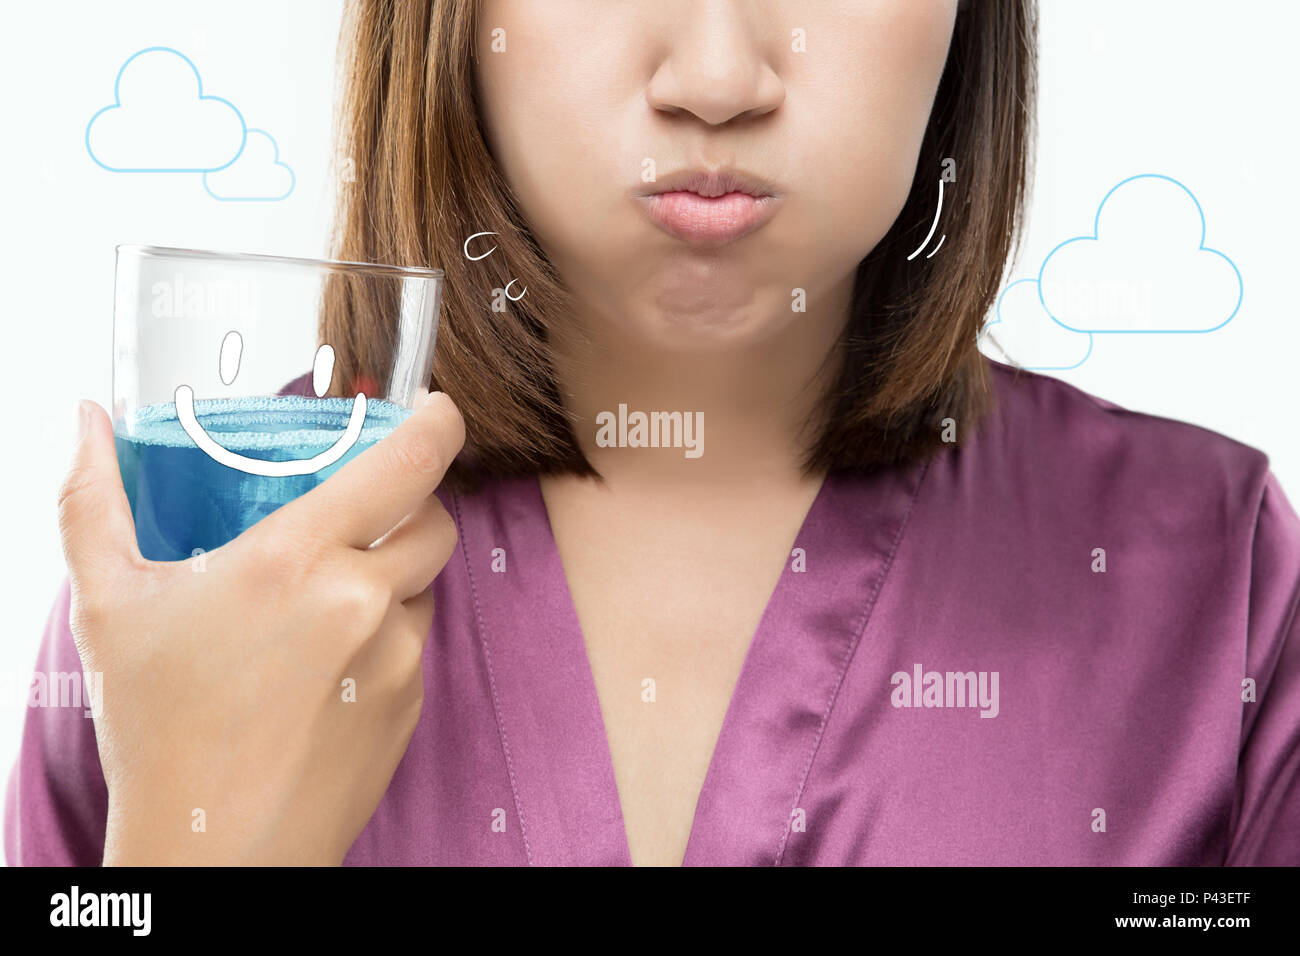 Asian woman rinsing and gargling while using mouthwash from a glass against gray background. Dental Healthcare Concepts. Stock Photo